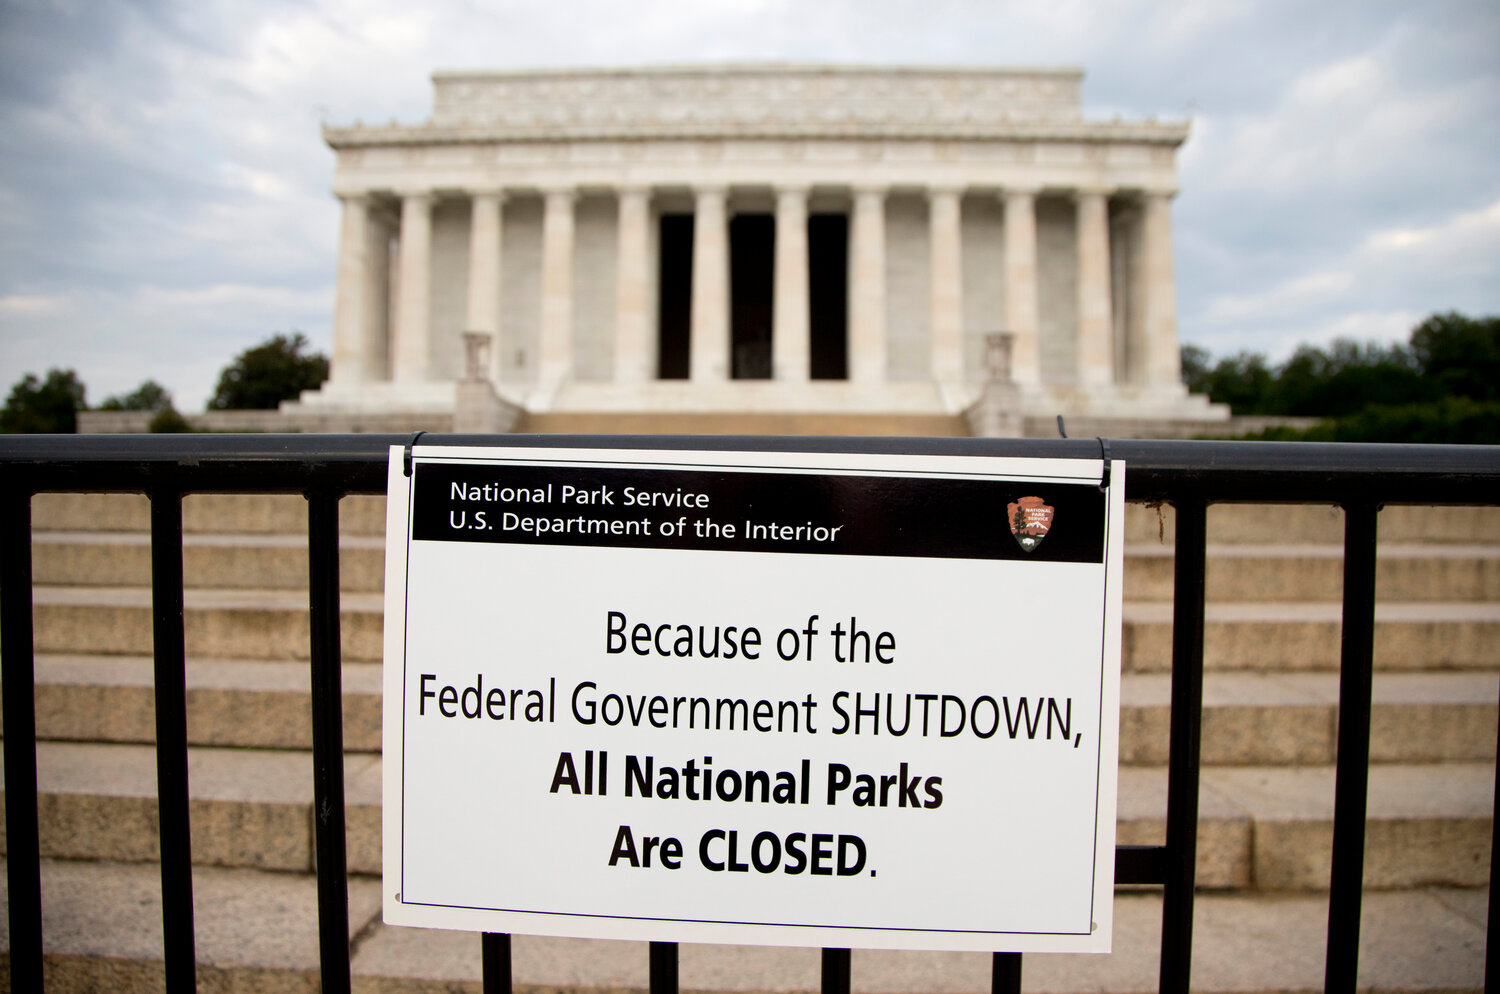 FILE - A sign reading "Because of the Federal Government SHUTDOWN All National Parks are Closed" is posted on a barricade in front of the Lincoln Memorial in Washington, Oct. 1, 2013. The federal government is heading toward a shutdown at month's end that will disrupt many services, squeeze workers and roil politics. It comes as Republicans in the House, fueled by hard-right demands for deep cuts, force a confrontation over federal spending.  (AP Photo/Carolyn Kaster, File)